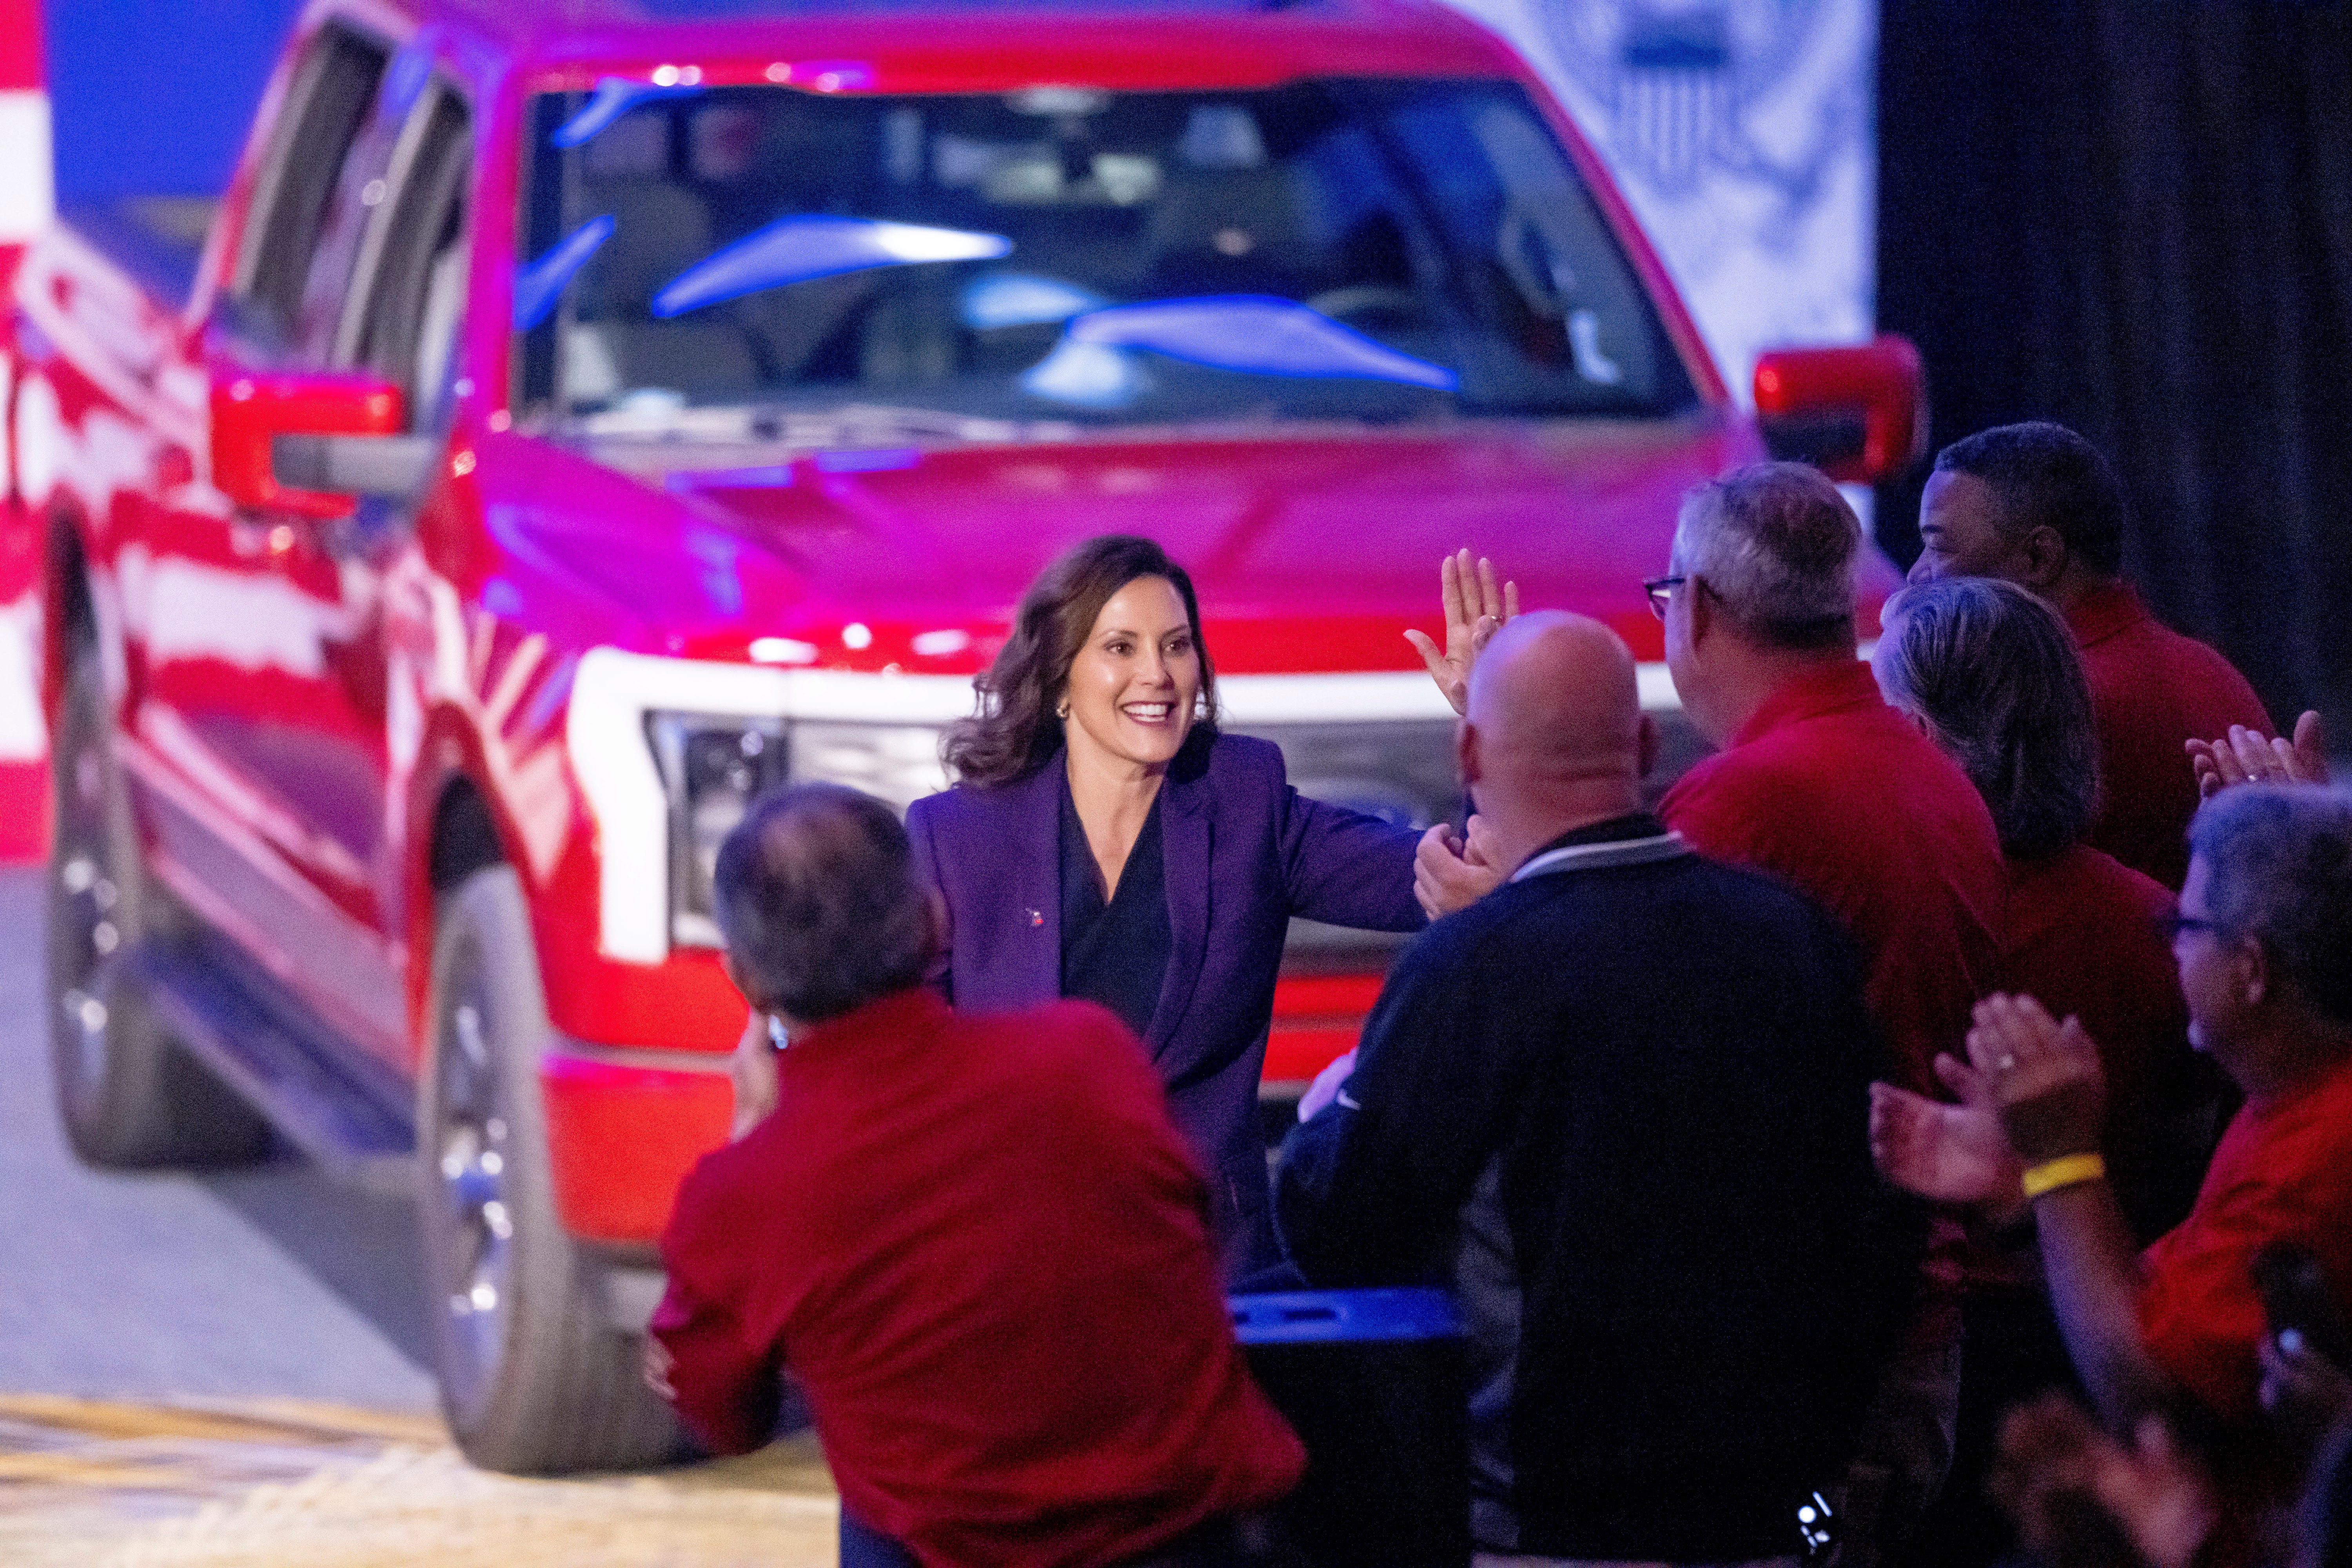 Michigan Governor Gretchen Whitmer comes out to make a speech before an appearance by President Joe Biden at the North American International Auto Show at Huntington Place, in Detroit, September 14, 2022.